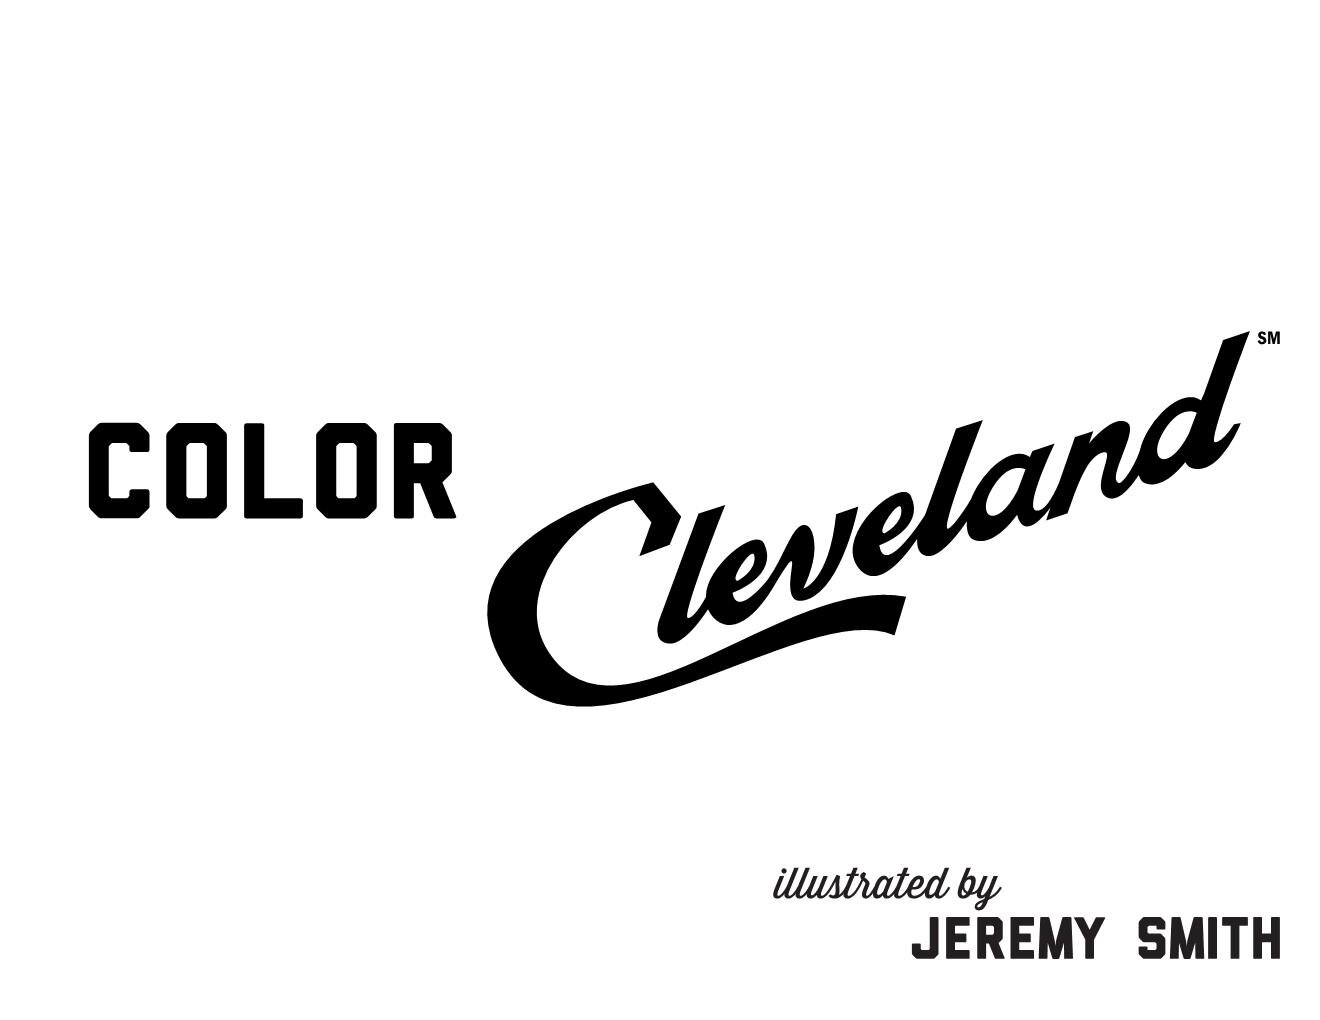 Color Cleveland Interior Pages Page 001.jpg